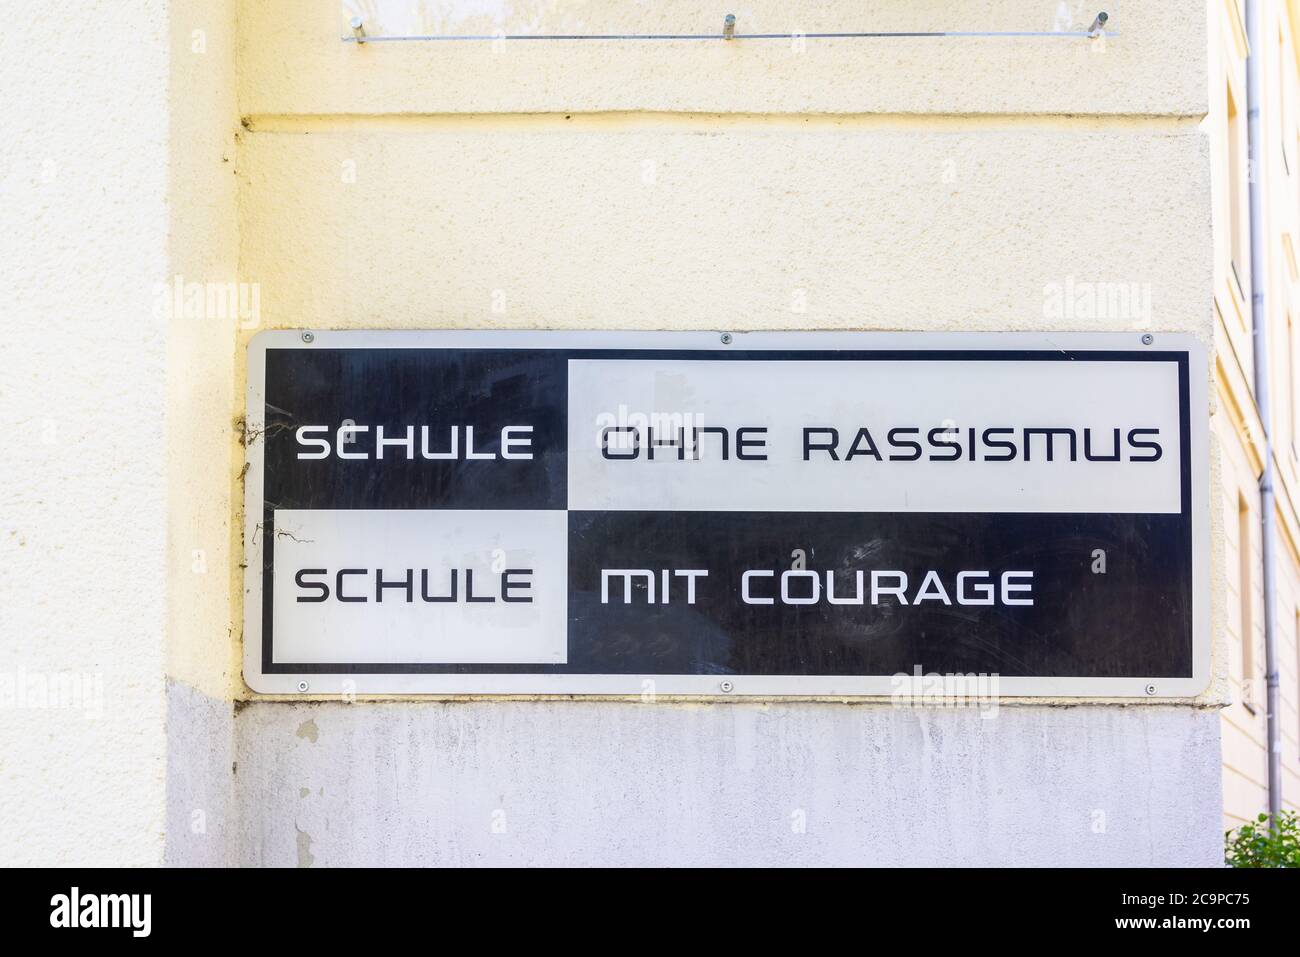 Schule ohne Rassismus, Schule mit Courage Schild - school without racism, school with courage sign outside a German college in Berlin, Germany, Europe Stock Photo